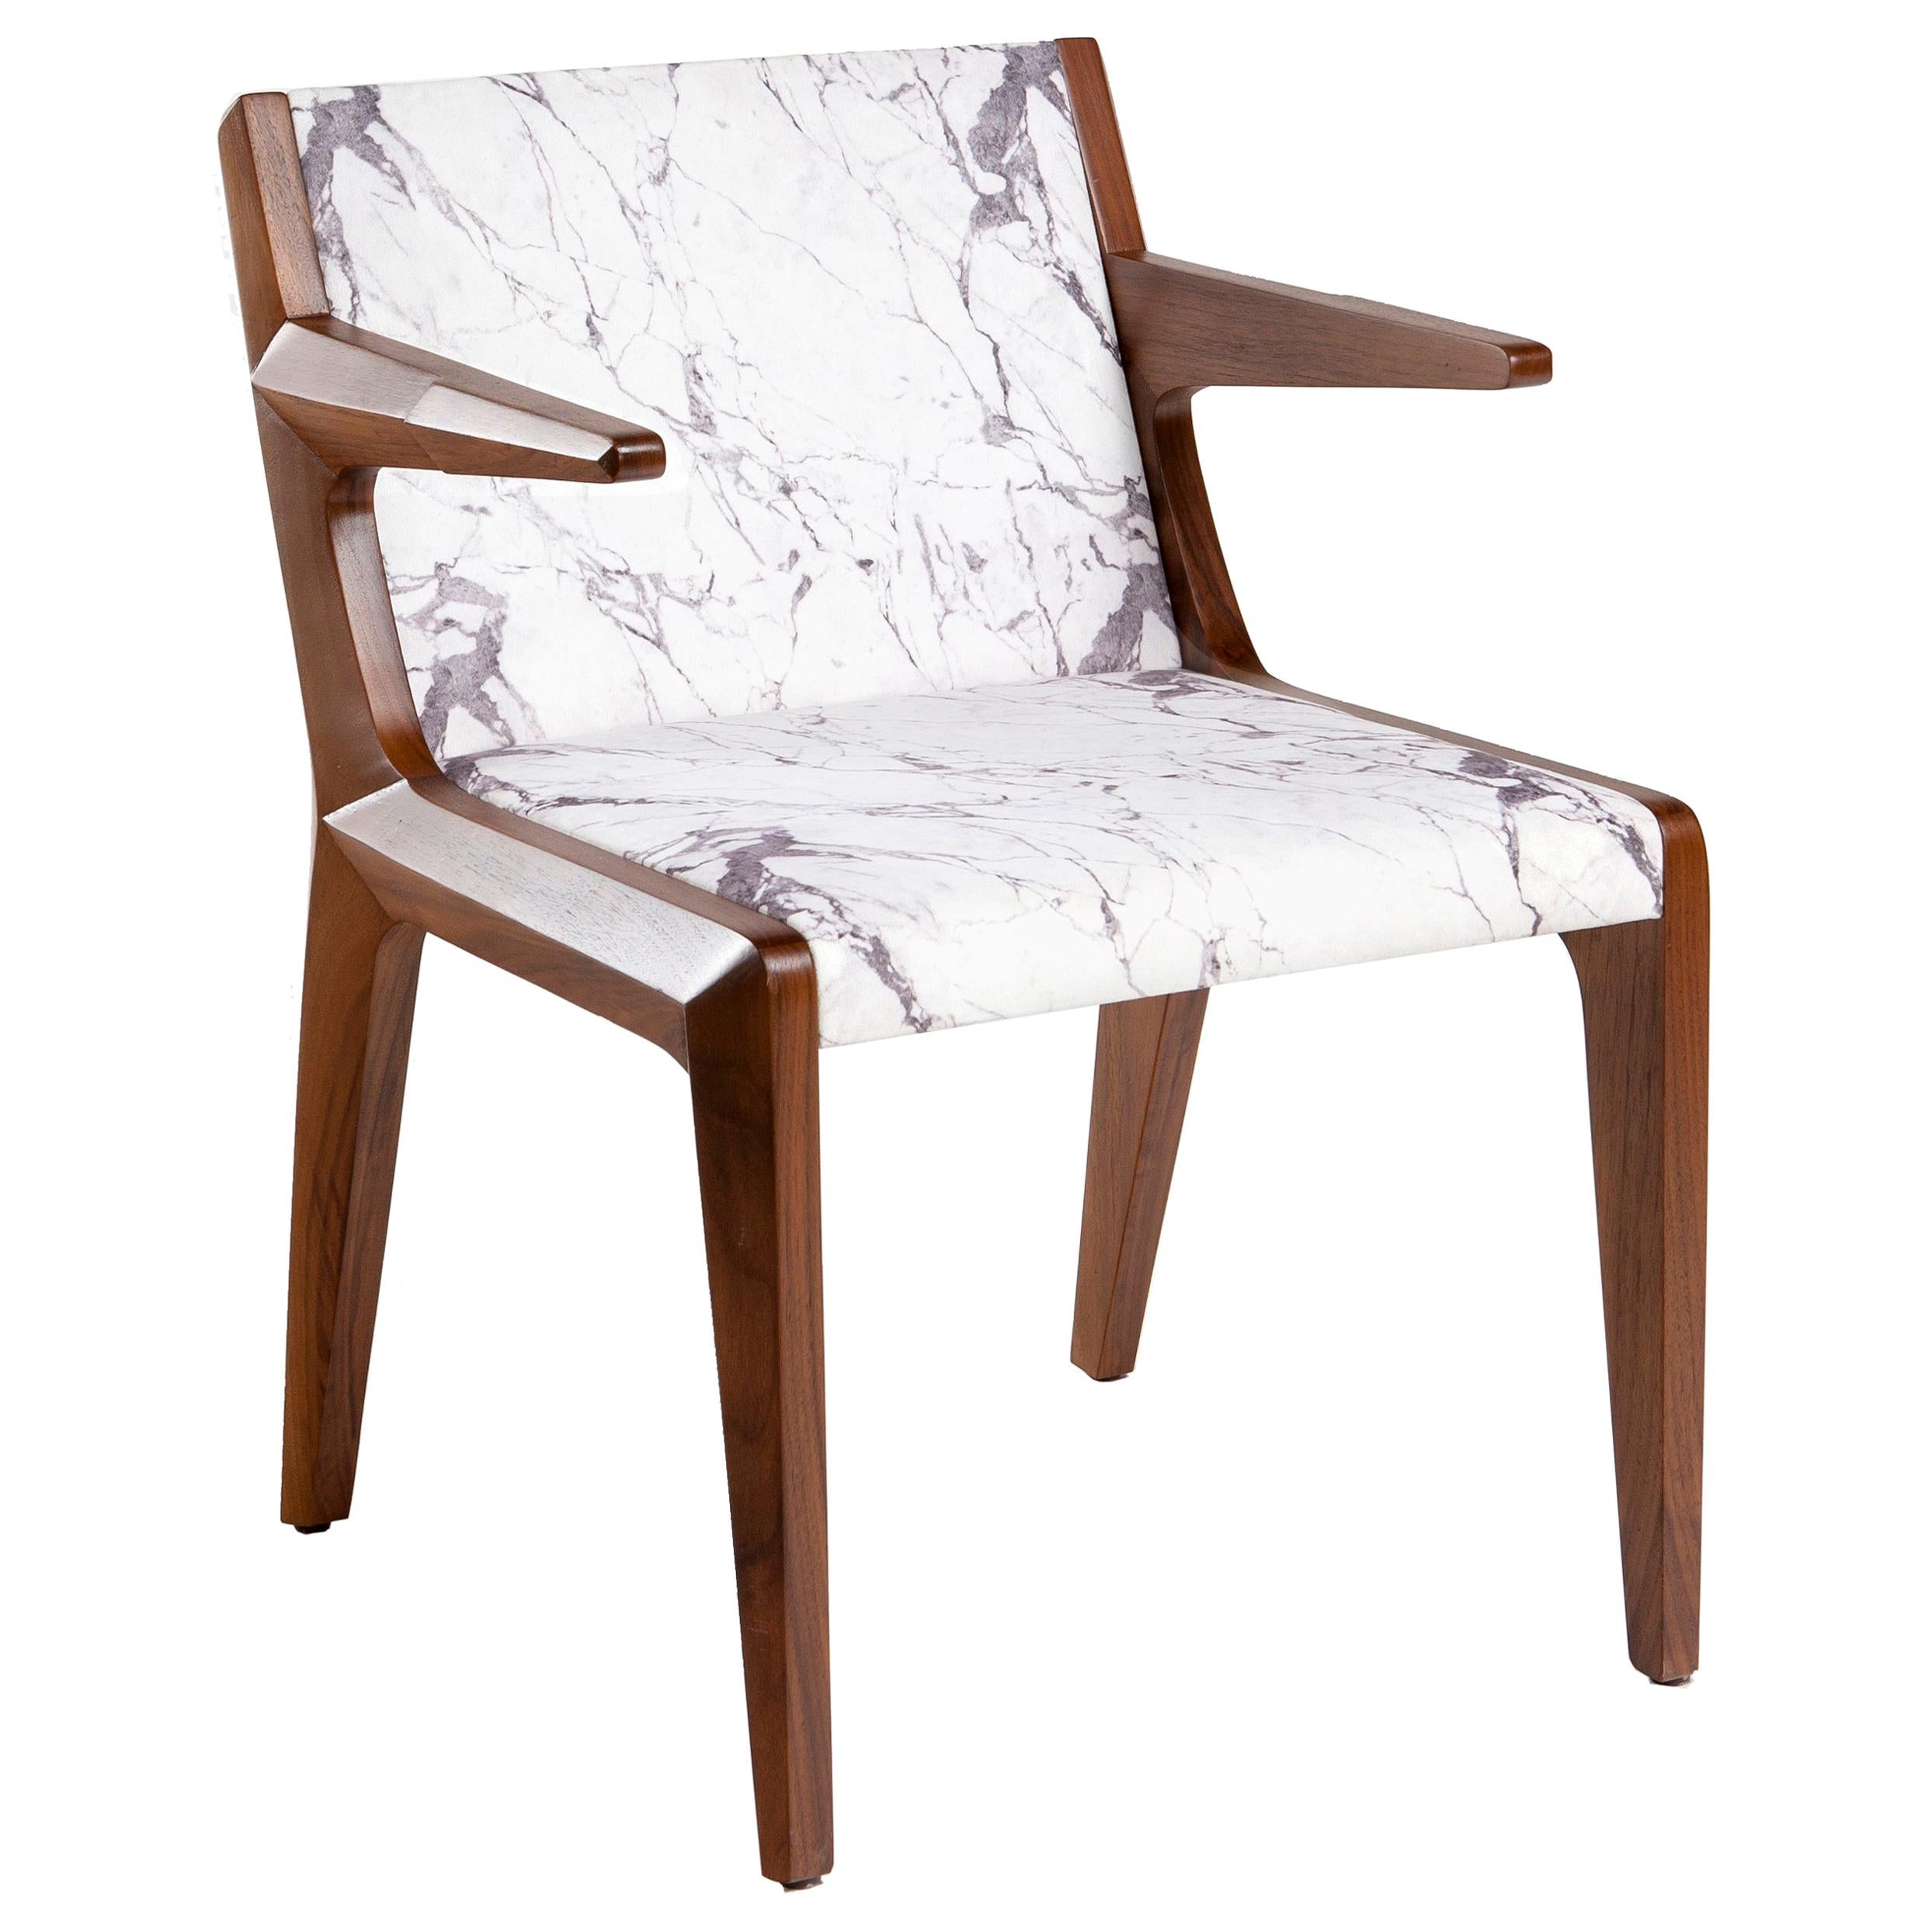 Take a Seat, International Style Chair, Dining Chair, Office Chair